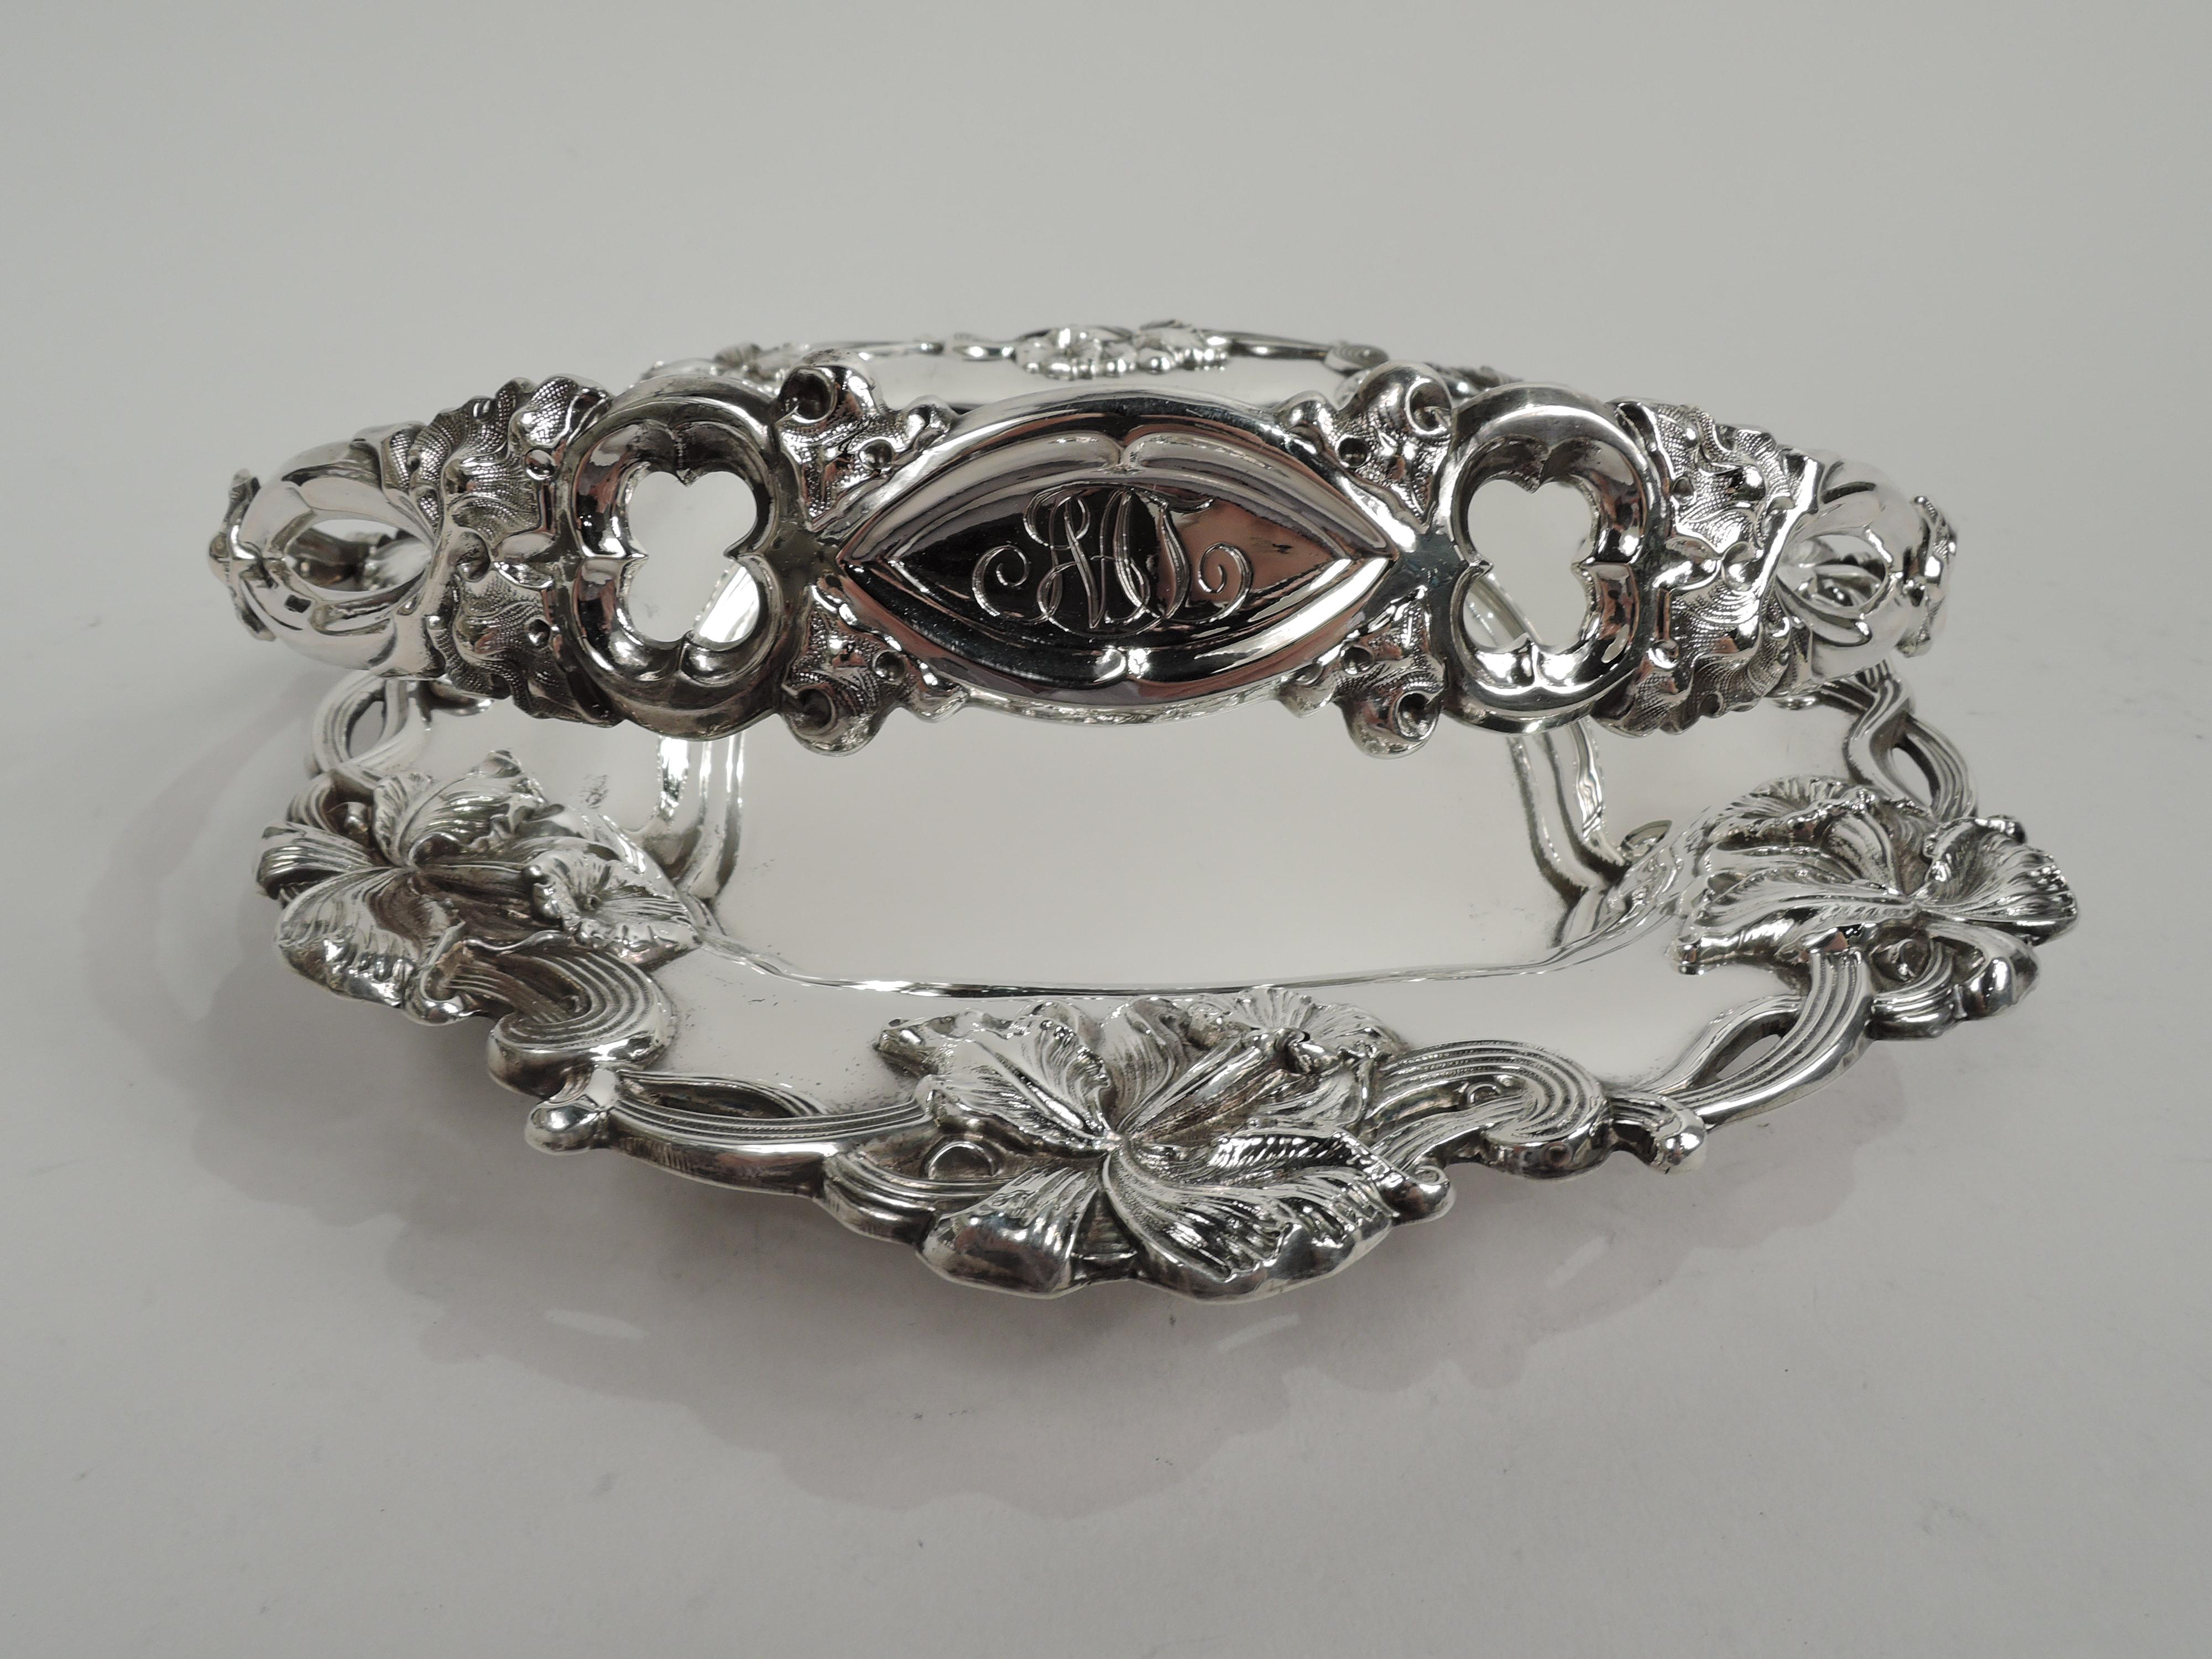 Art Nouveau sterling silver basket. Rectangular shaped well. Rim open and applied with entwined and reeded stems and loose and fluid flower heads. C-scroll swing handle with alternating open shapes, stippled leaves, and central solid oval cartouche